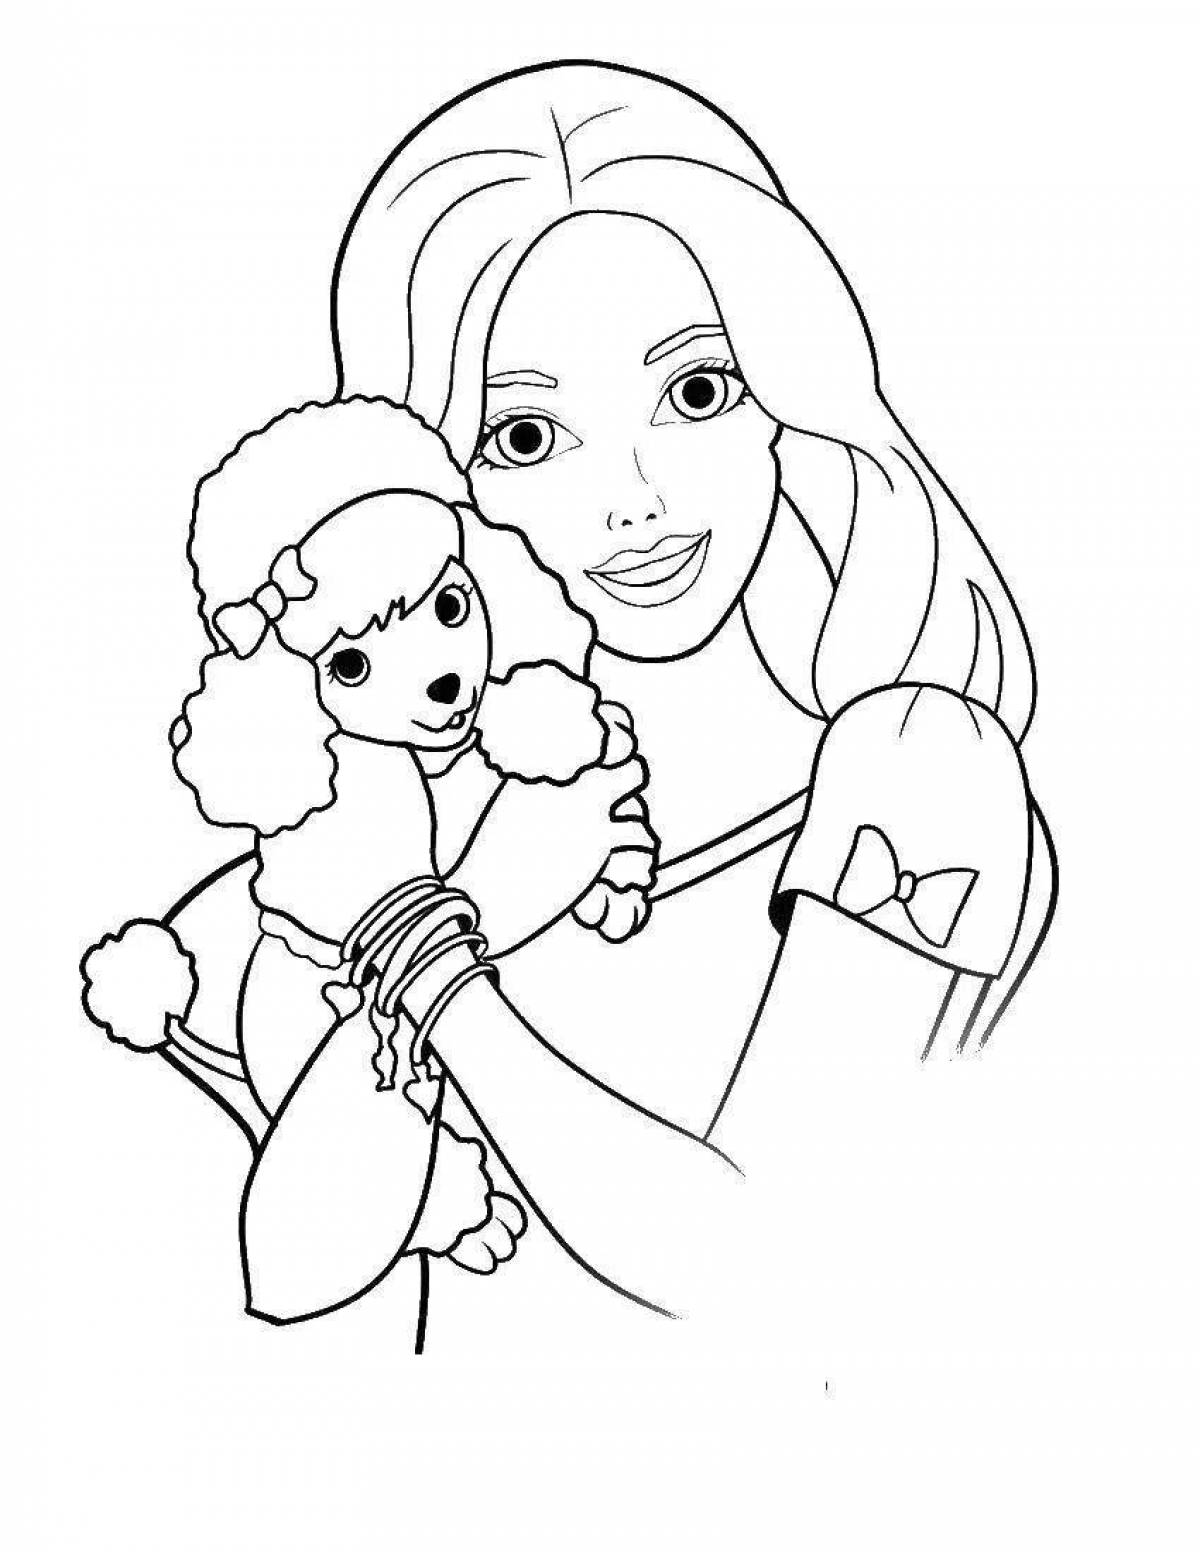 Animated coloring book girl with dog